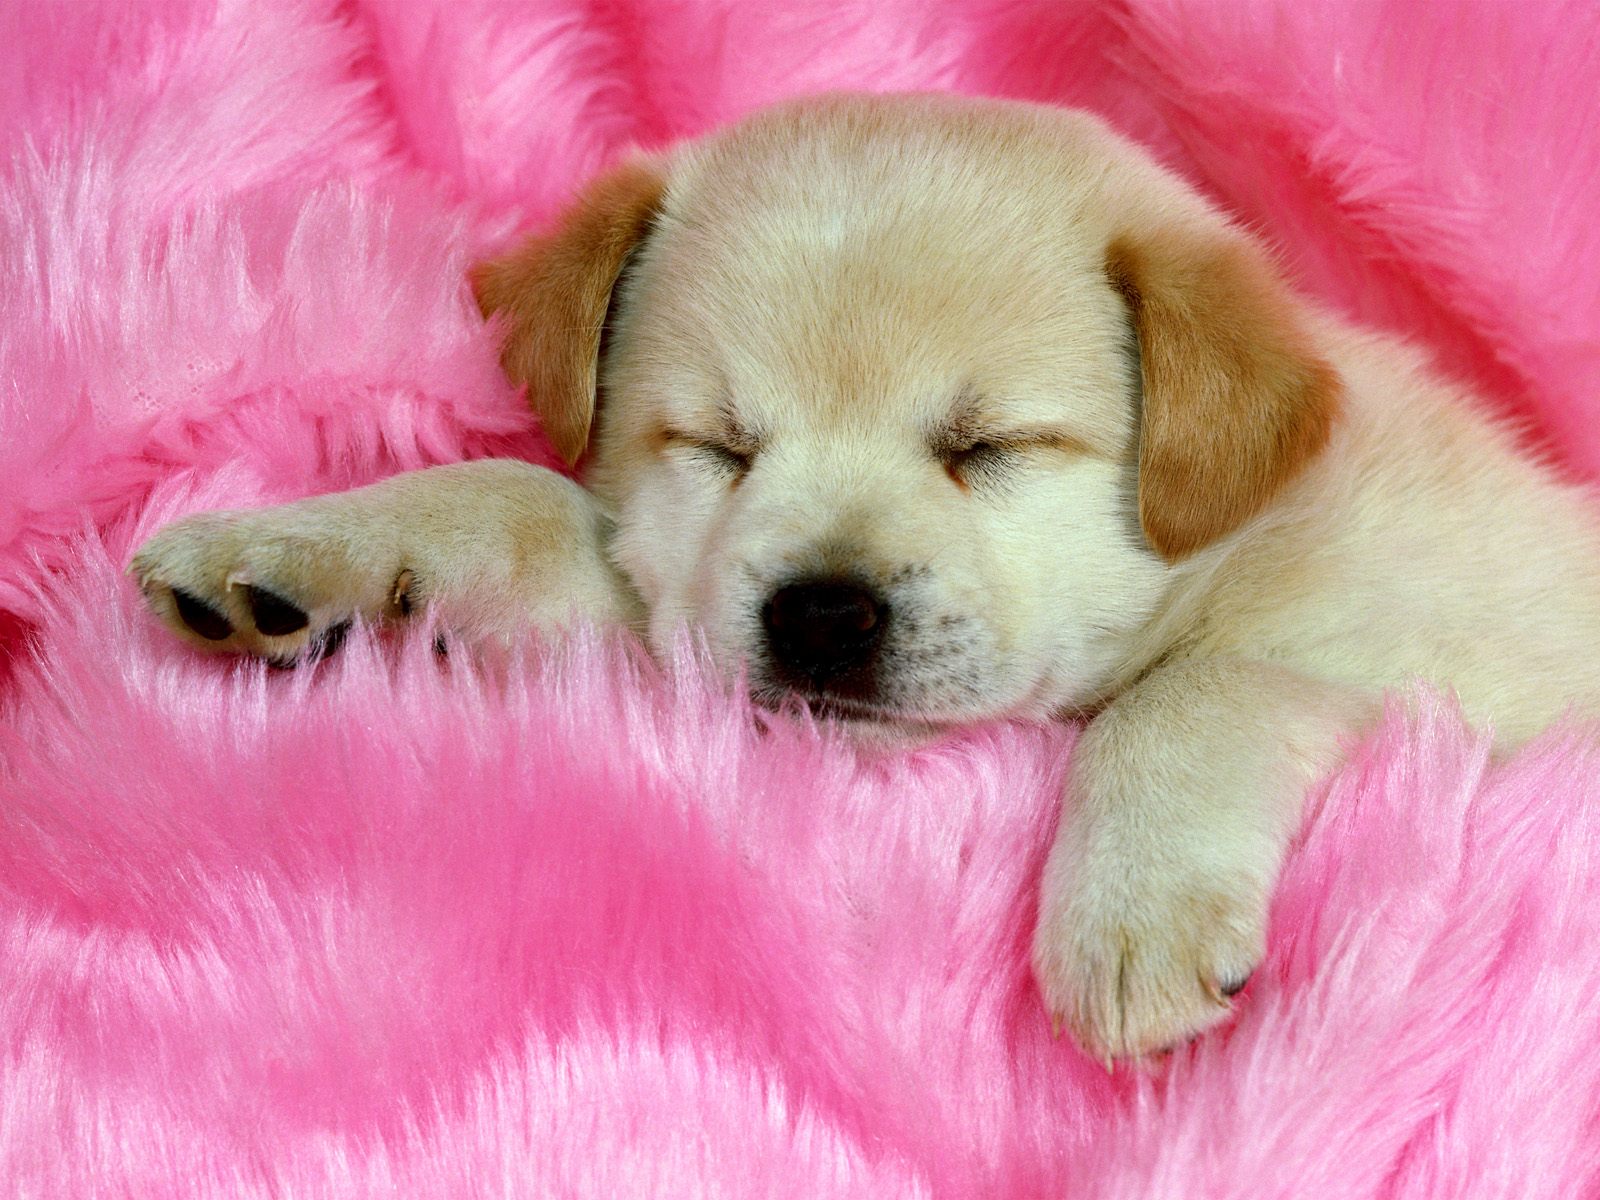  Things PicturesImages And Wallpapers Cute Puppies Wallpapers HD 1600x1200